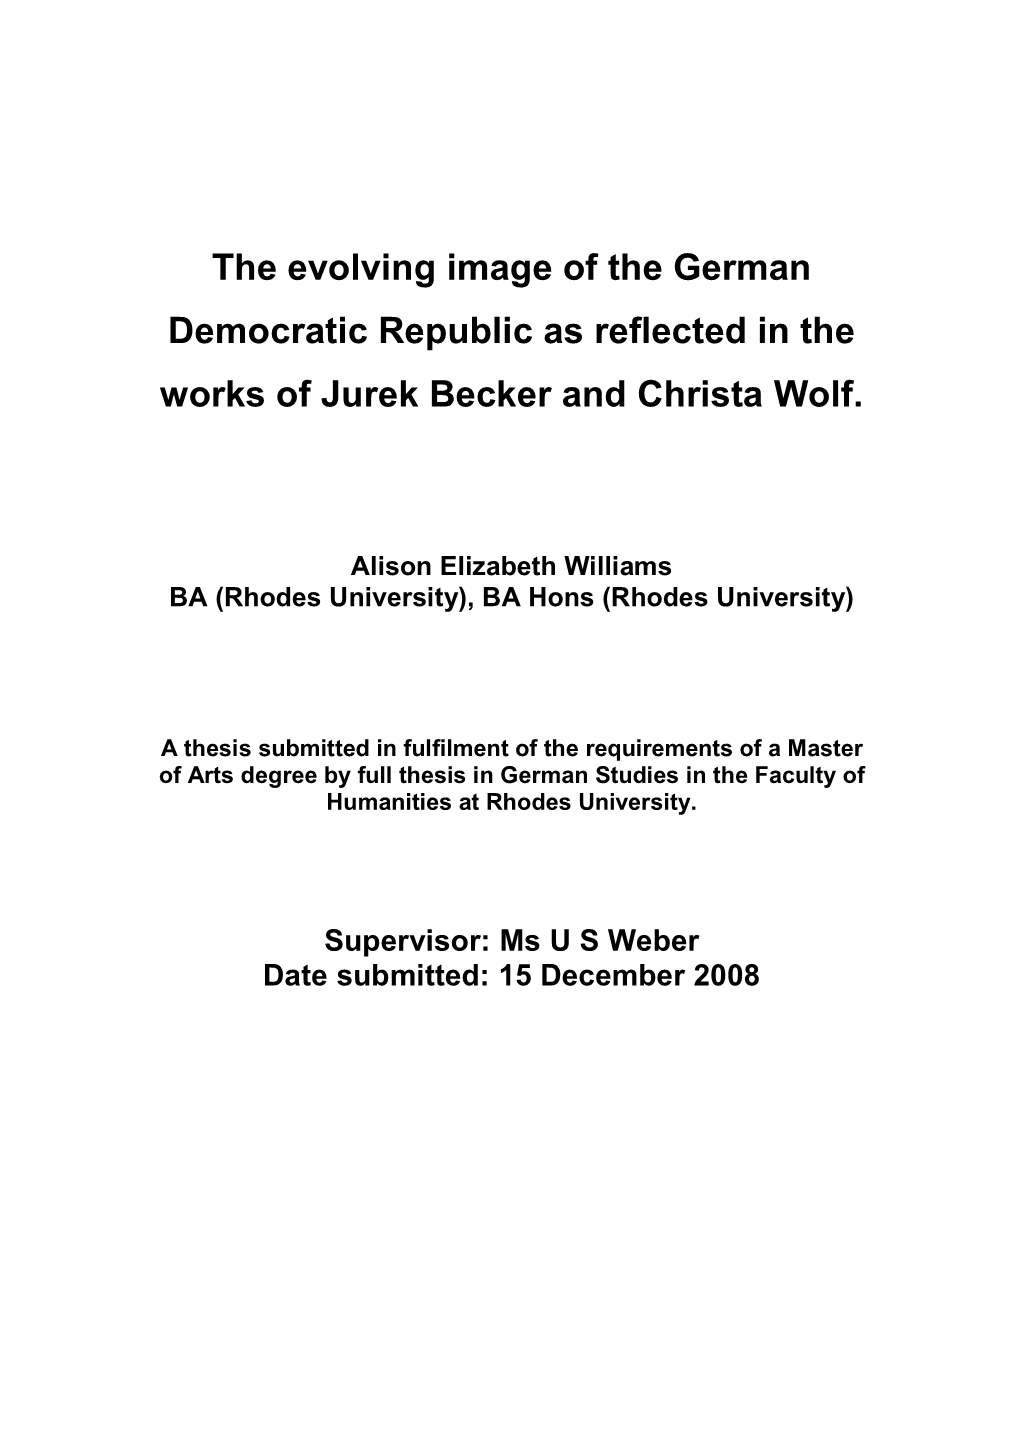 The Evolving Image of the German Democratic Republic As Reflected in the Works of Jurek Becker and Christa Wolf